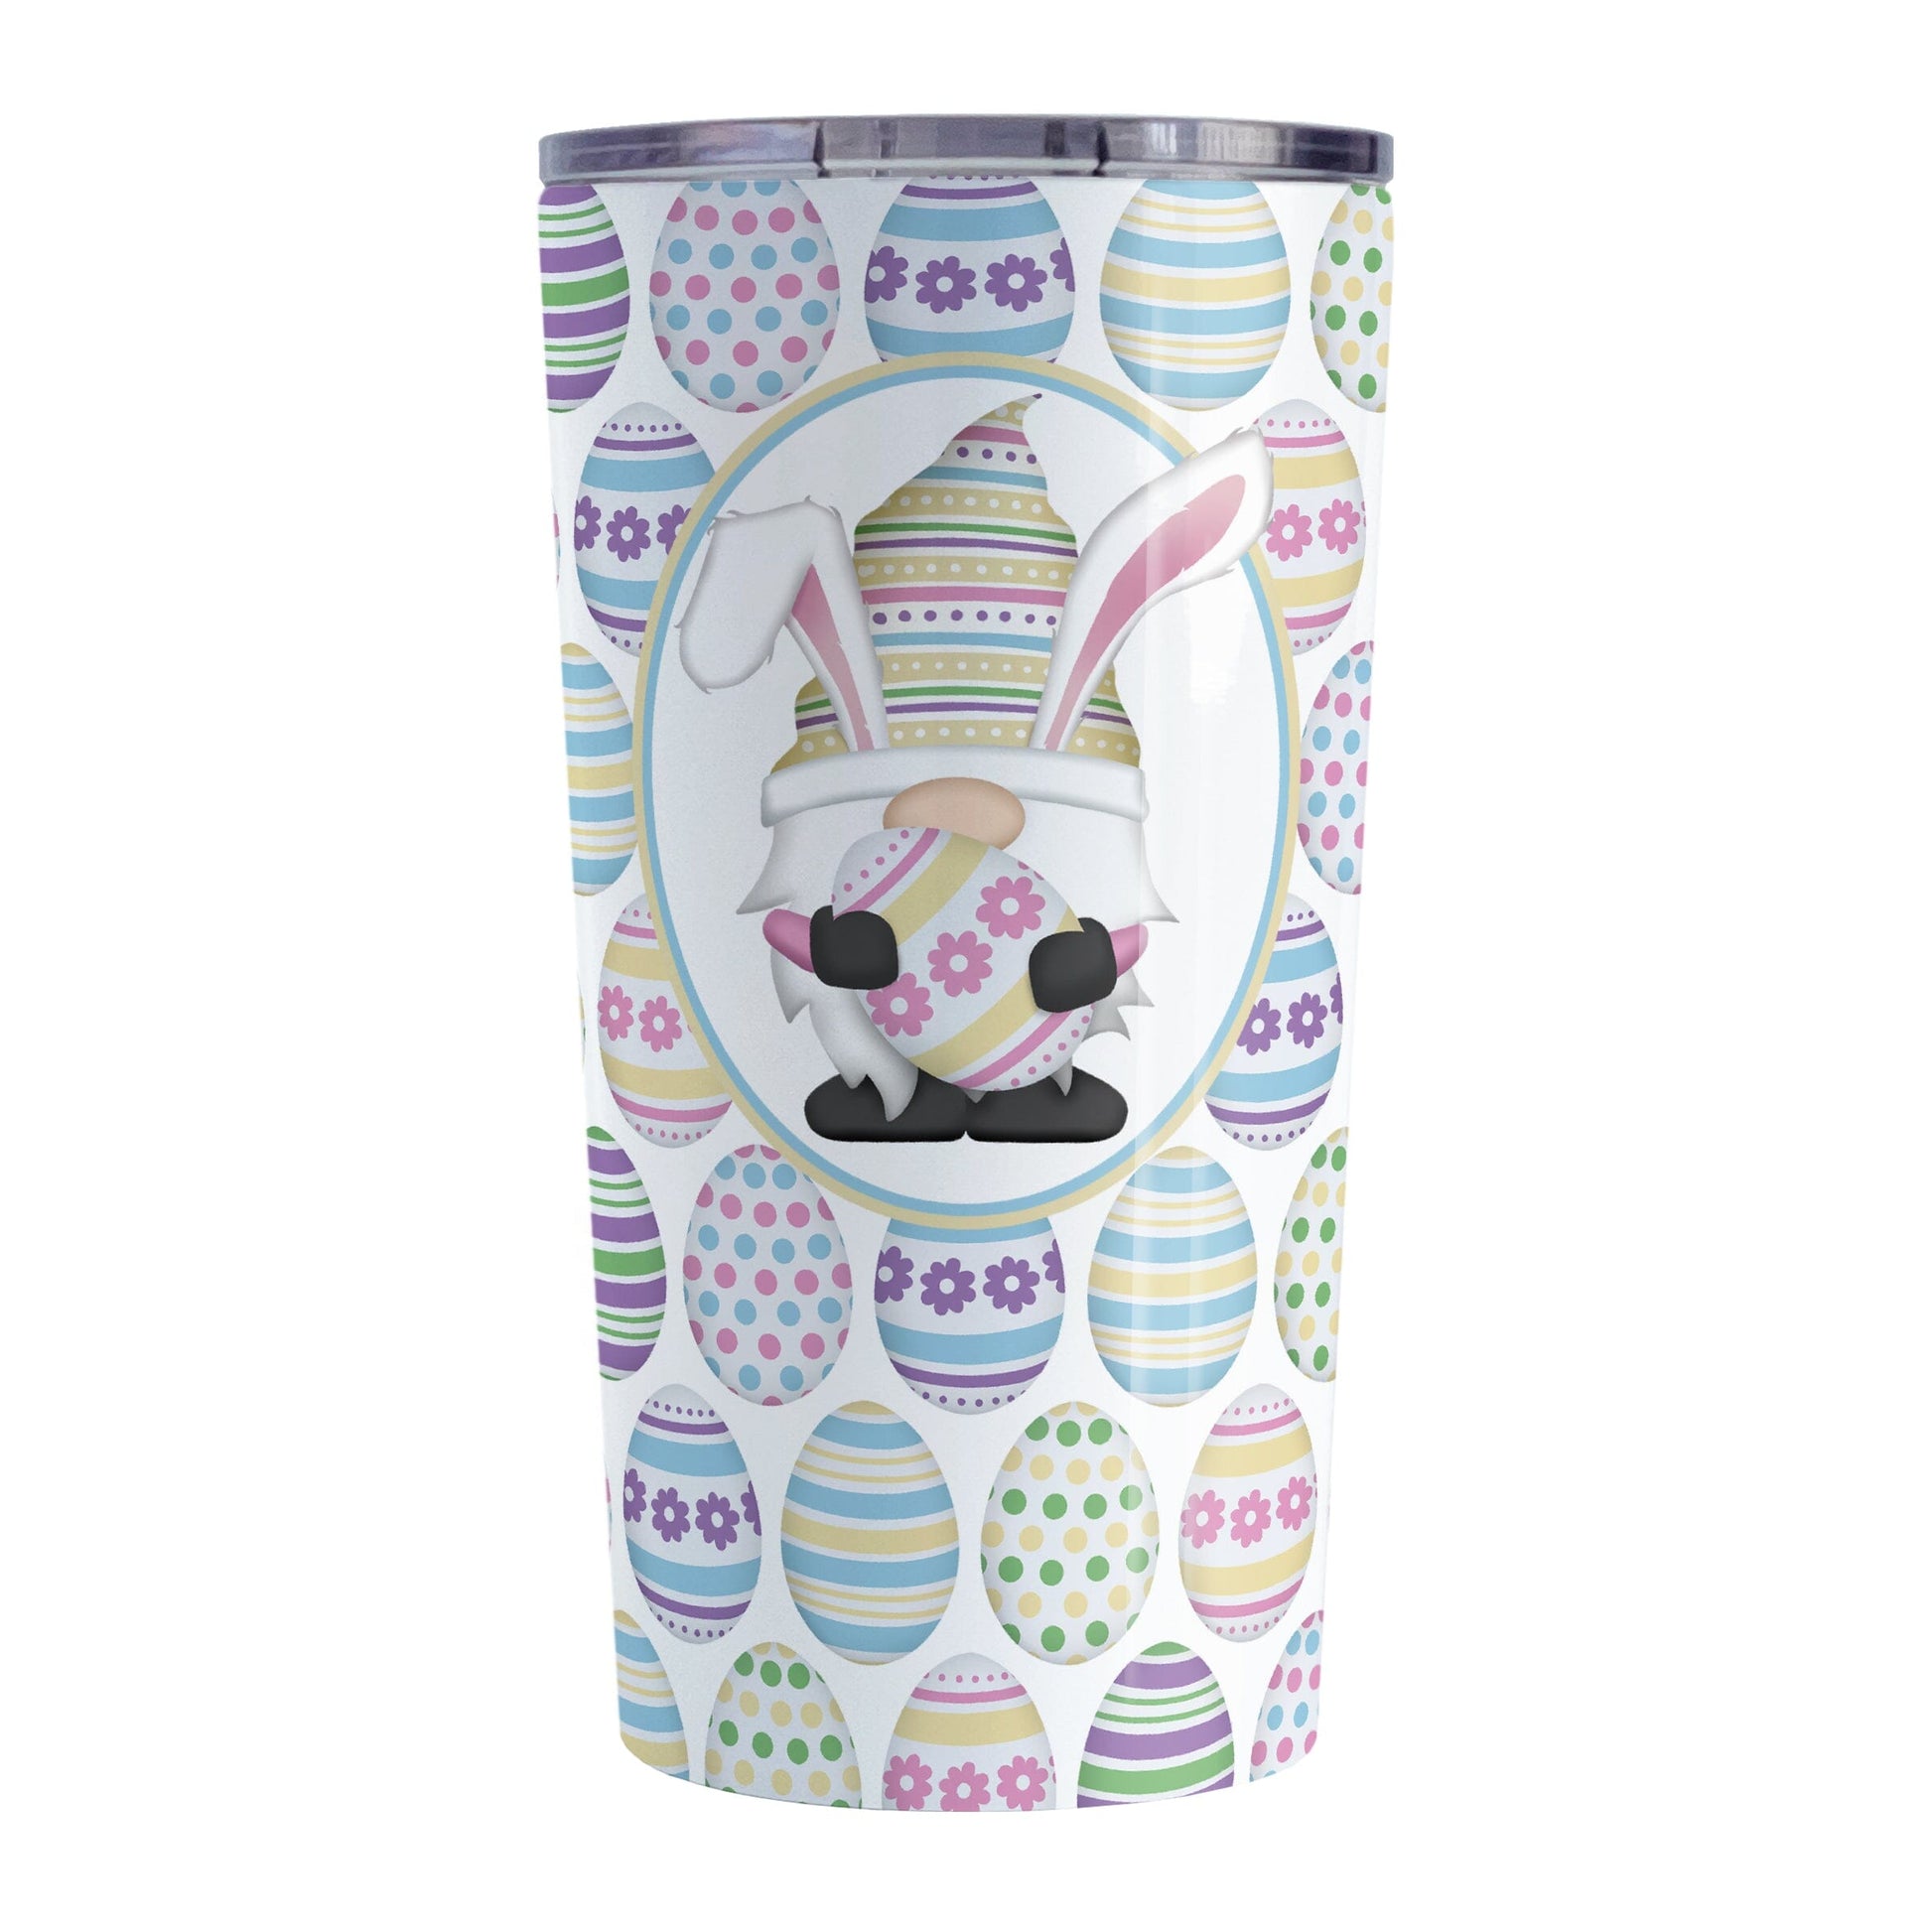 Easter Gnome Eggs Tumbler Cup (20oz) at Amy's Coffee Mugs. A stainless steel tumbler cup designed with an illustration of an adorable gnome with bunny ears, holding a large pink and yellow Easter egg, in a white oval over a decorated Easter eggs pattern that wraps around the cup.